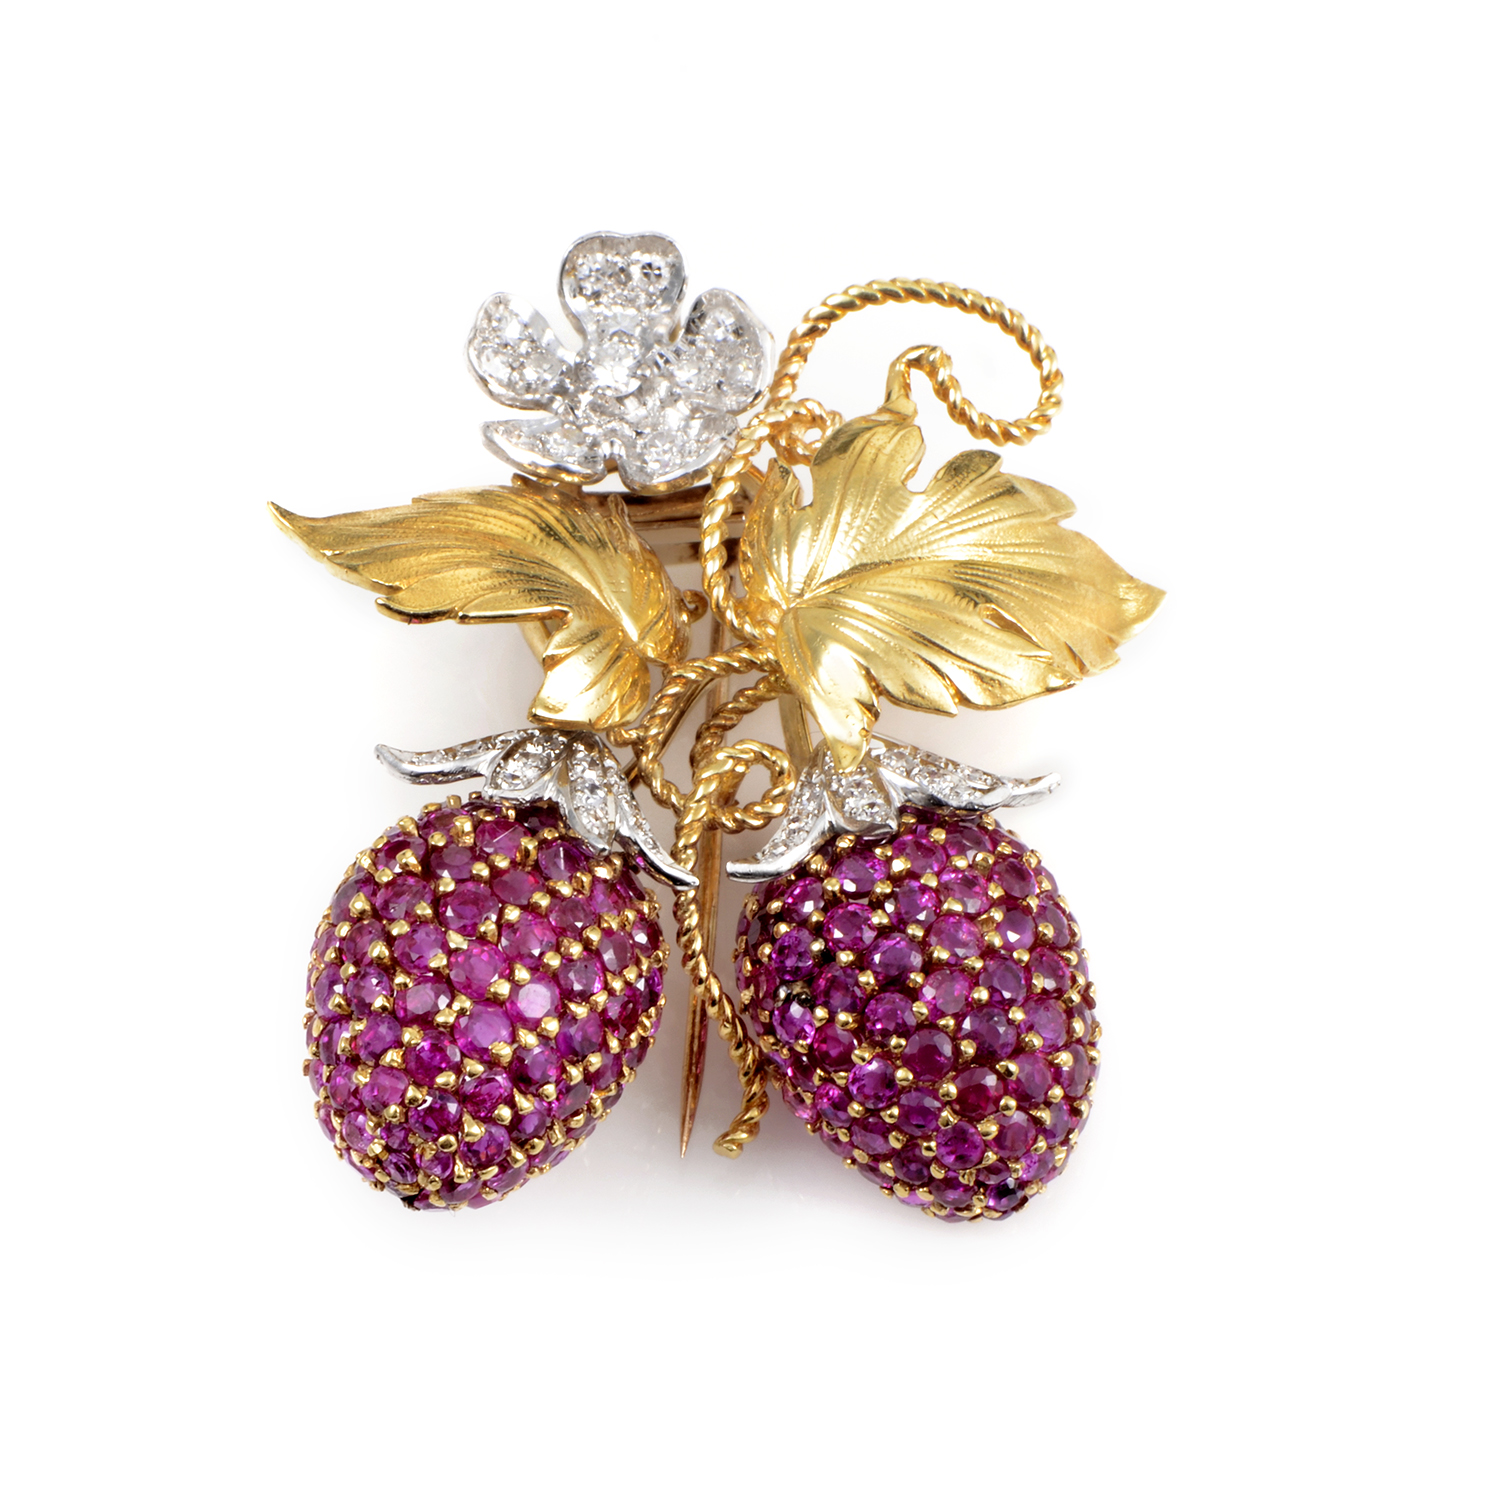 Platinum 18K Yellow Gold Diamond and Ruby Berry Brooch